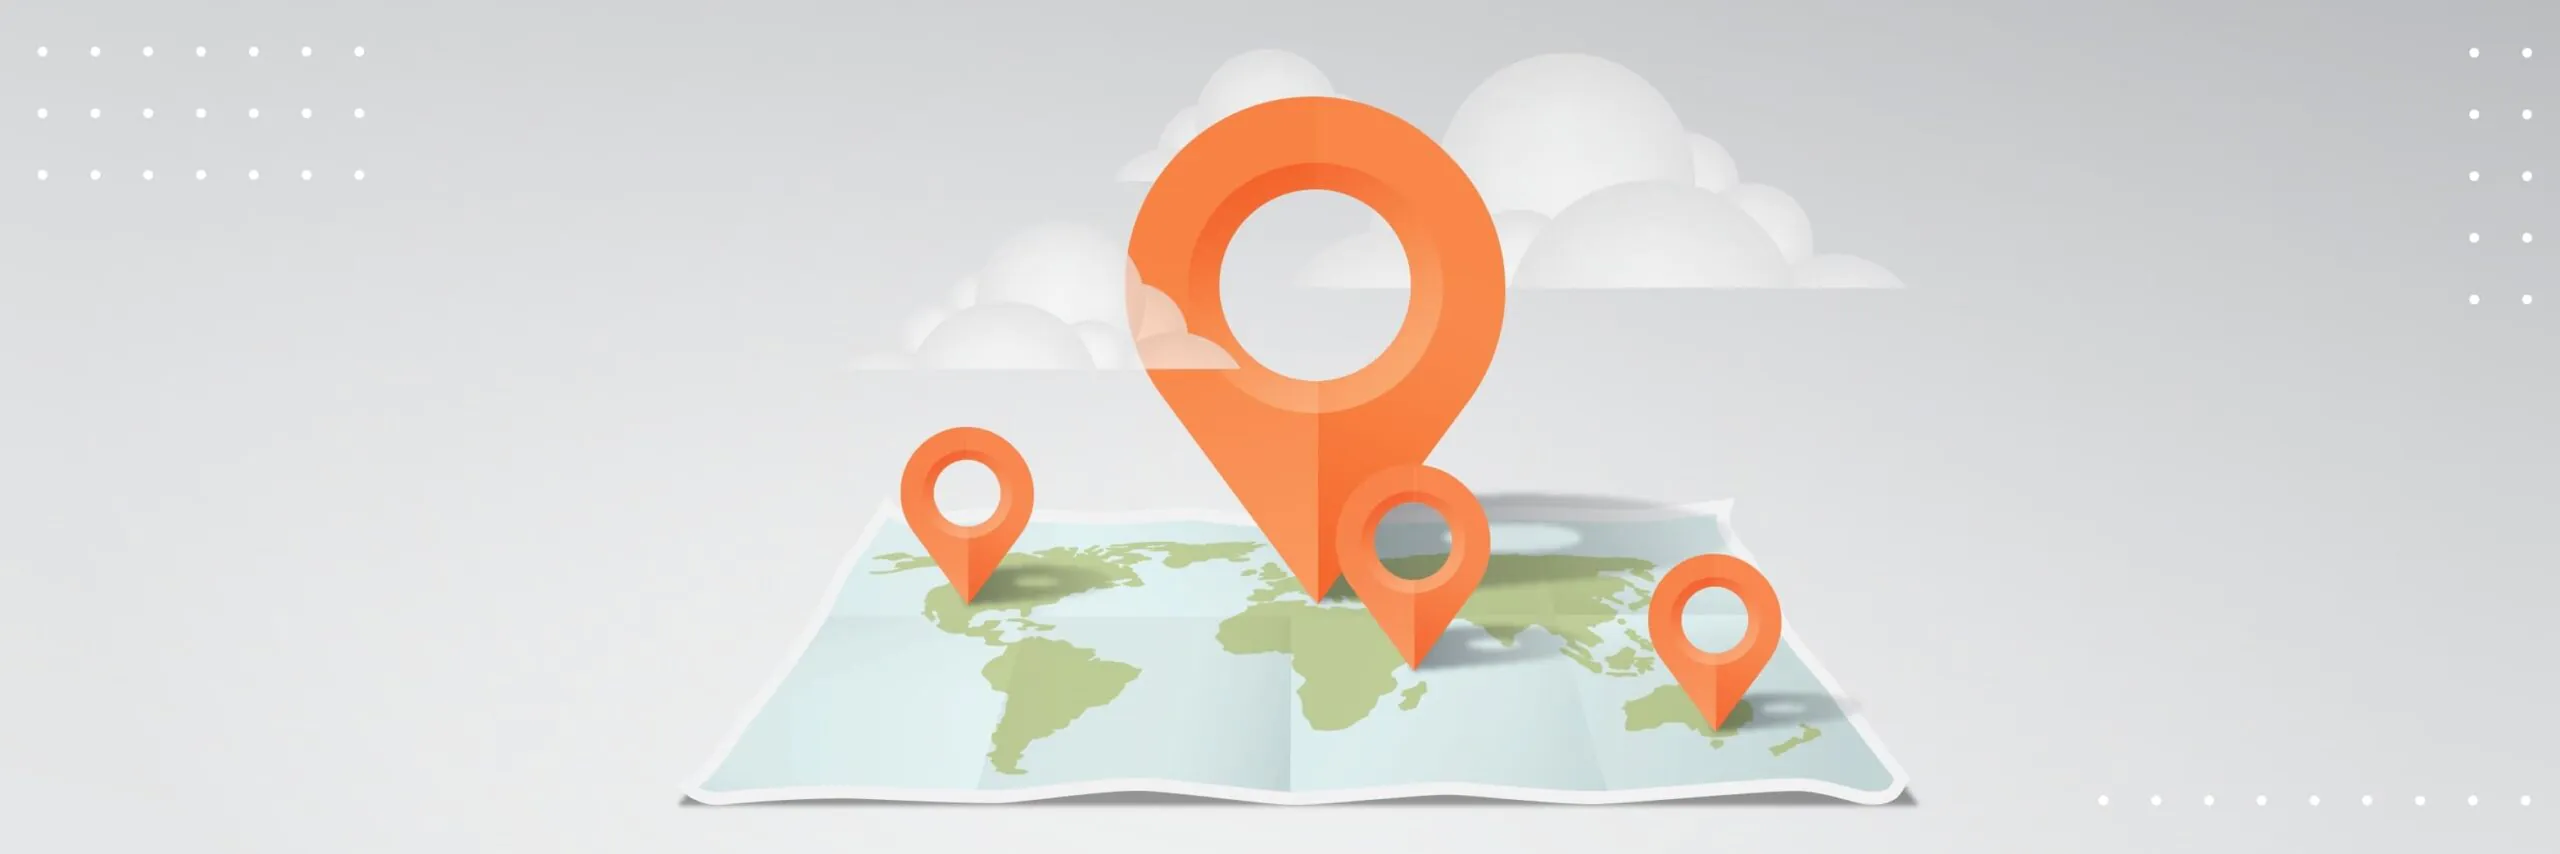 How to Create a Location-Based App: Strategy and Process Roadmap article image